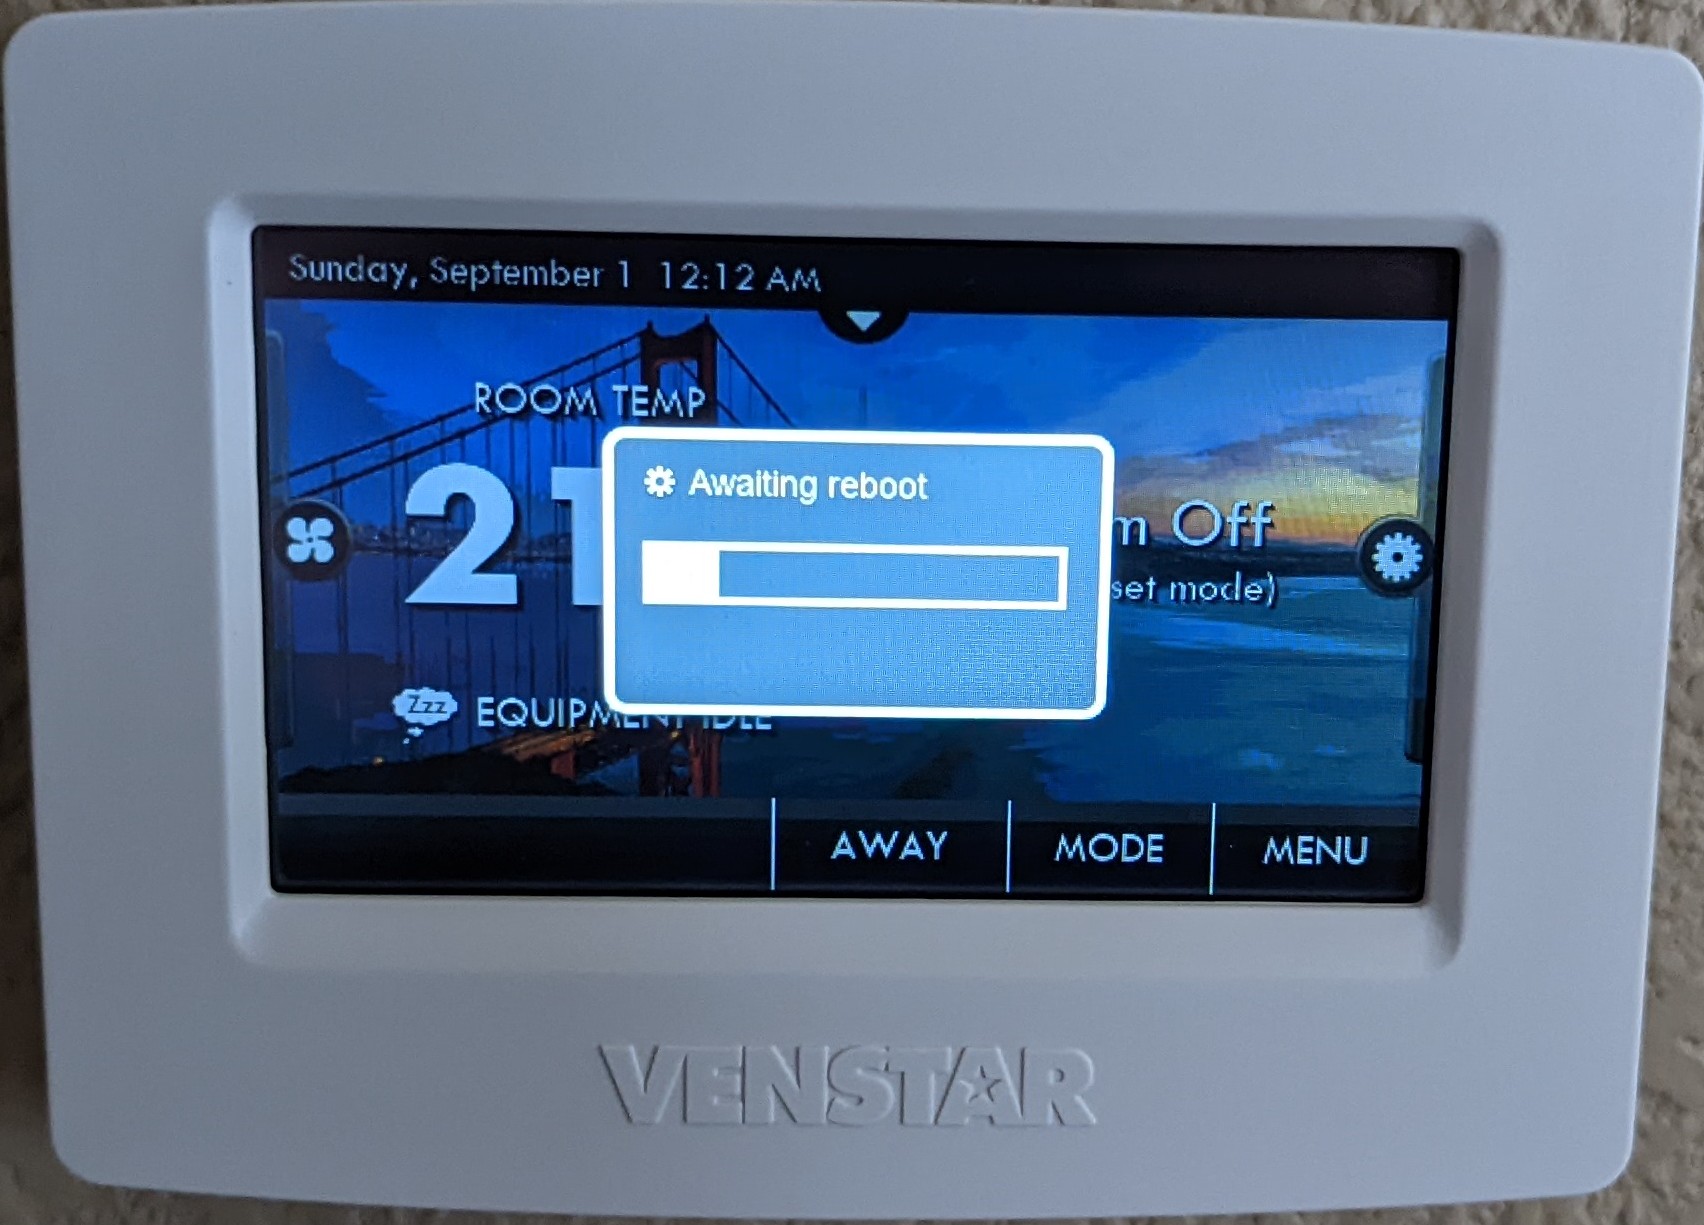 Picture showing the installed thermostat with a disruptive dialogue indicating an incipient reboot.